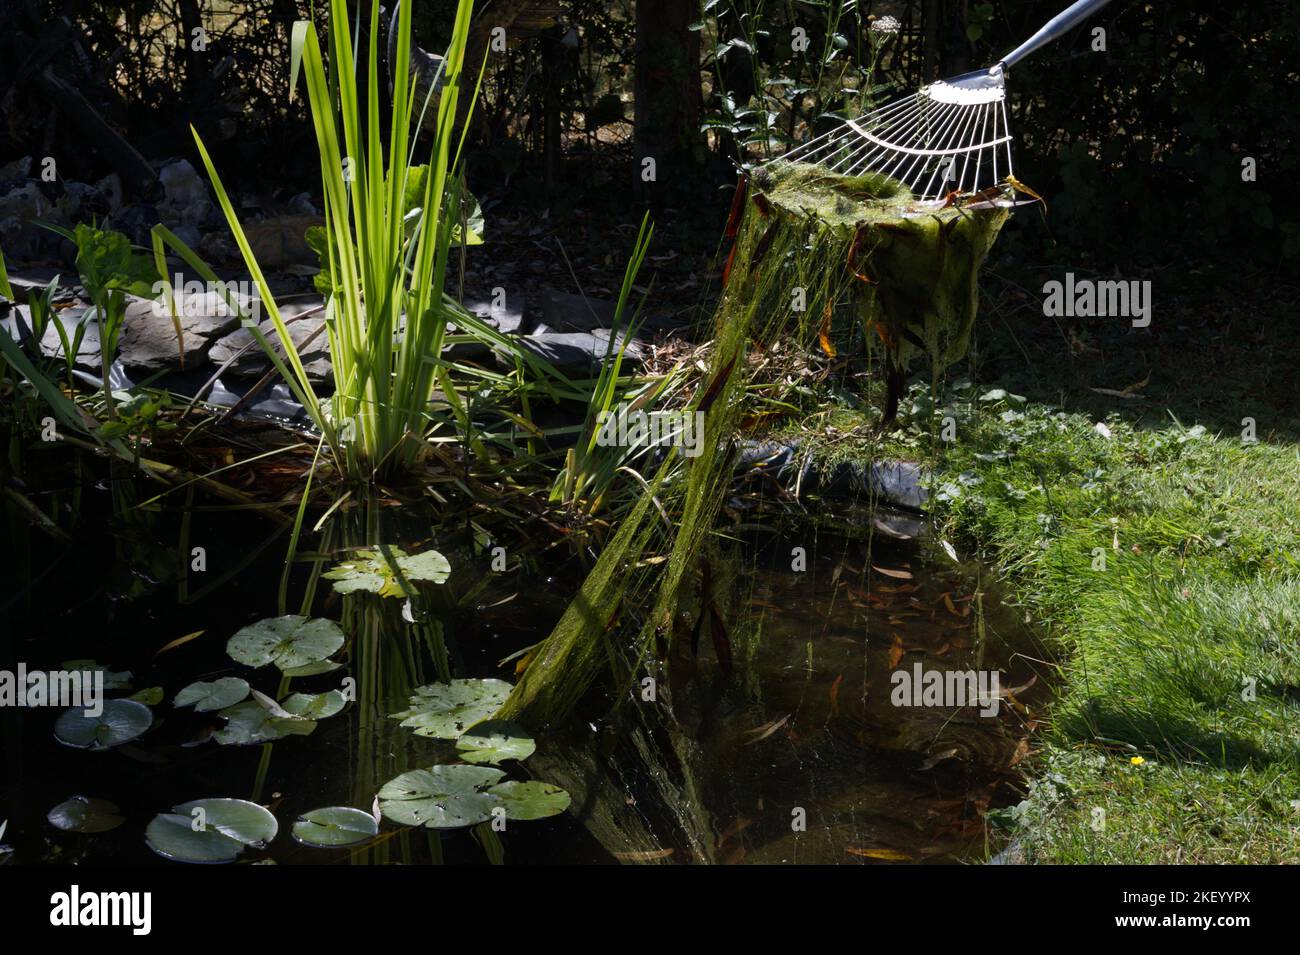 Blanket weed being removed from a garden pond Stock Photo